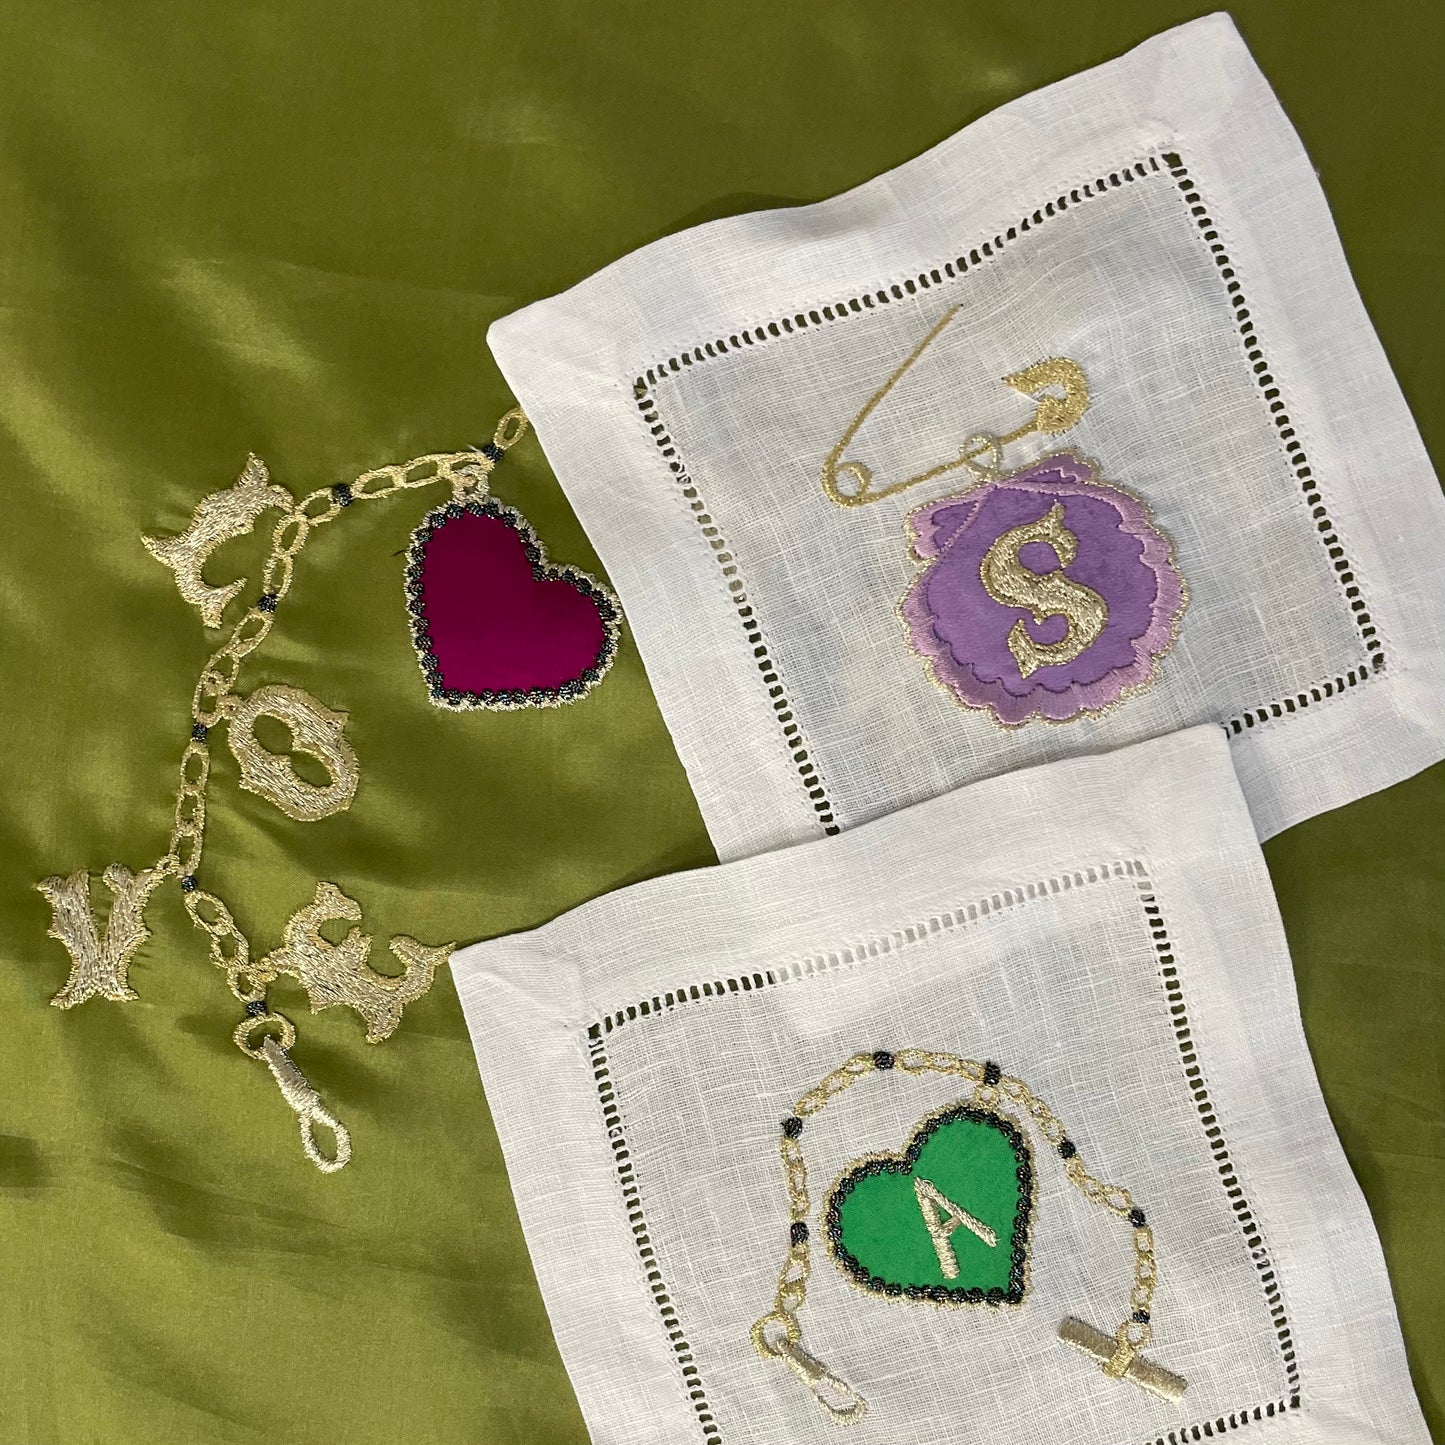 Two embroidered artworks from the Love Token collection on a piece of olive green fabric which has an embroidered charm bracelet on